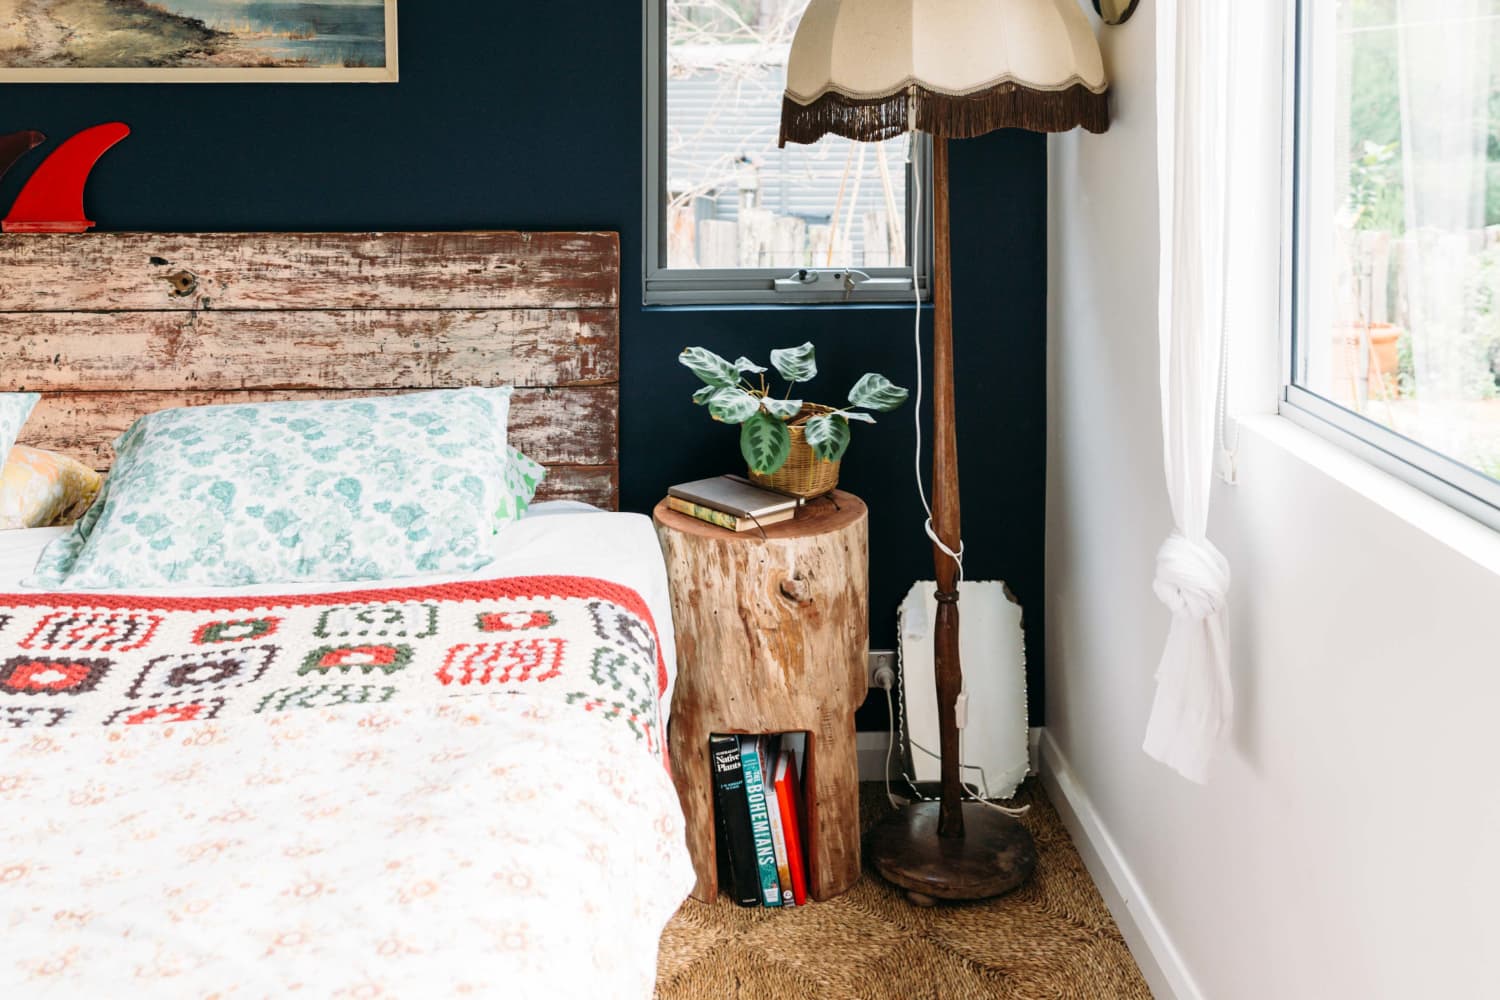 Cheap bedside tables to give your bedroom an update